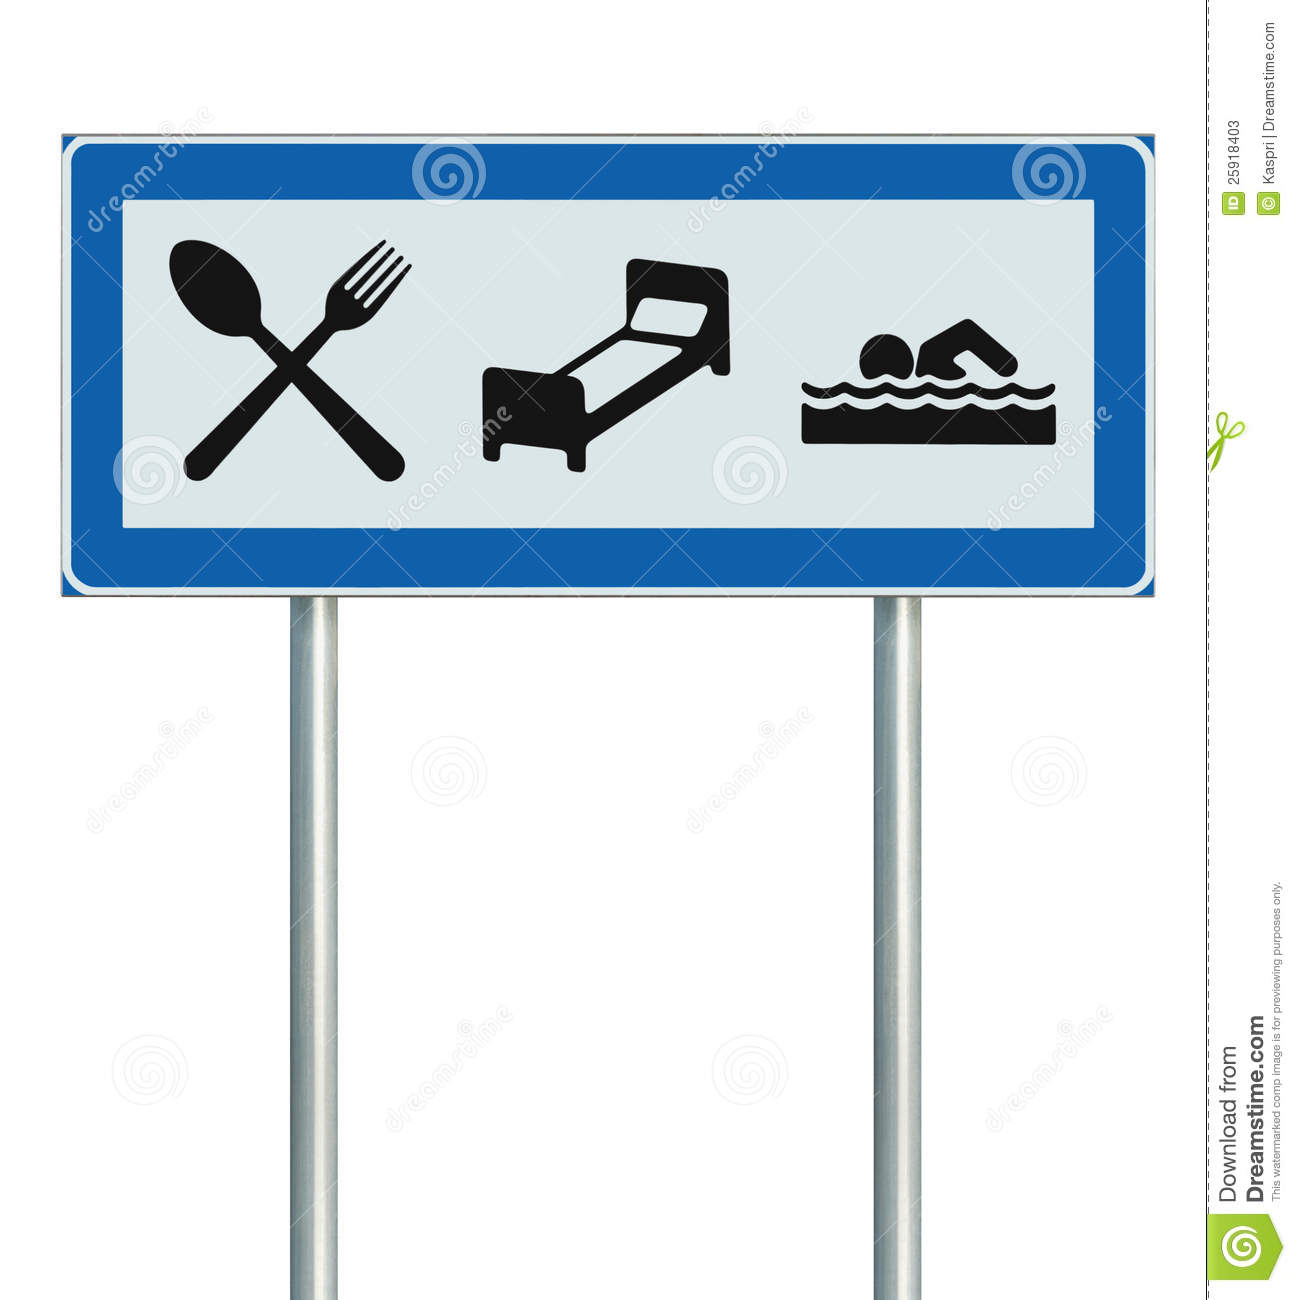 Parking Lot Road Sign Isolated Restaurant Hotel Motel Swimming Pool